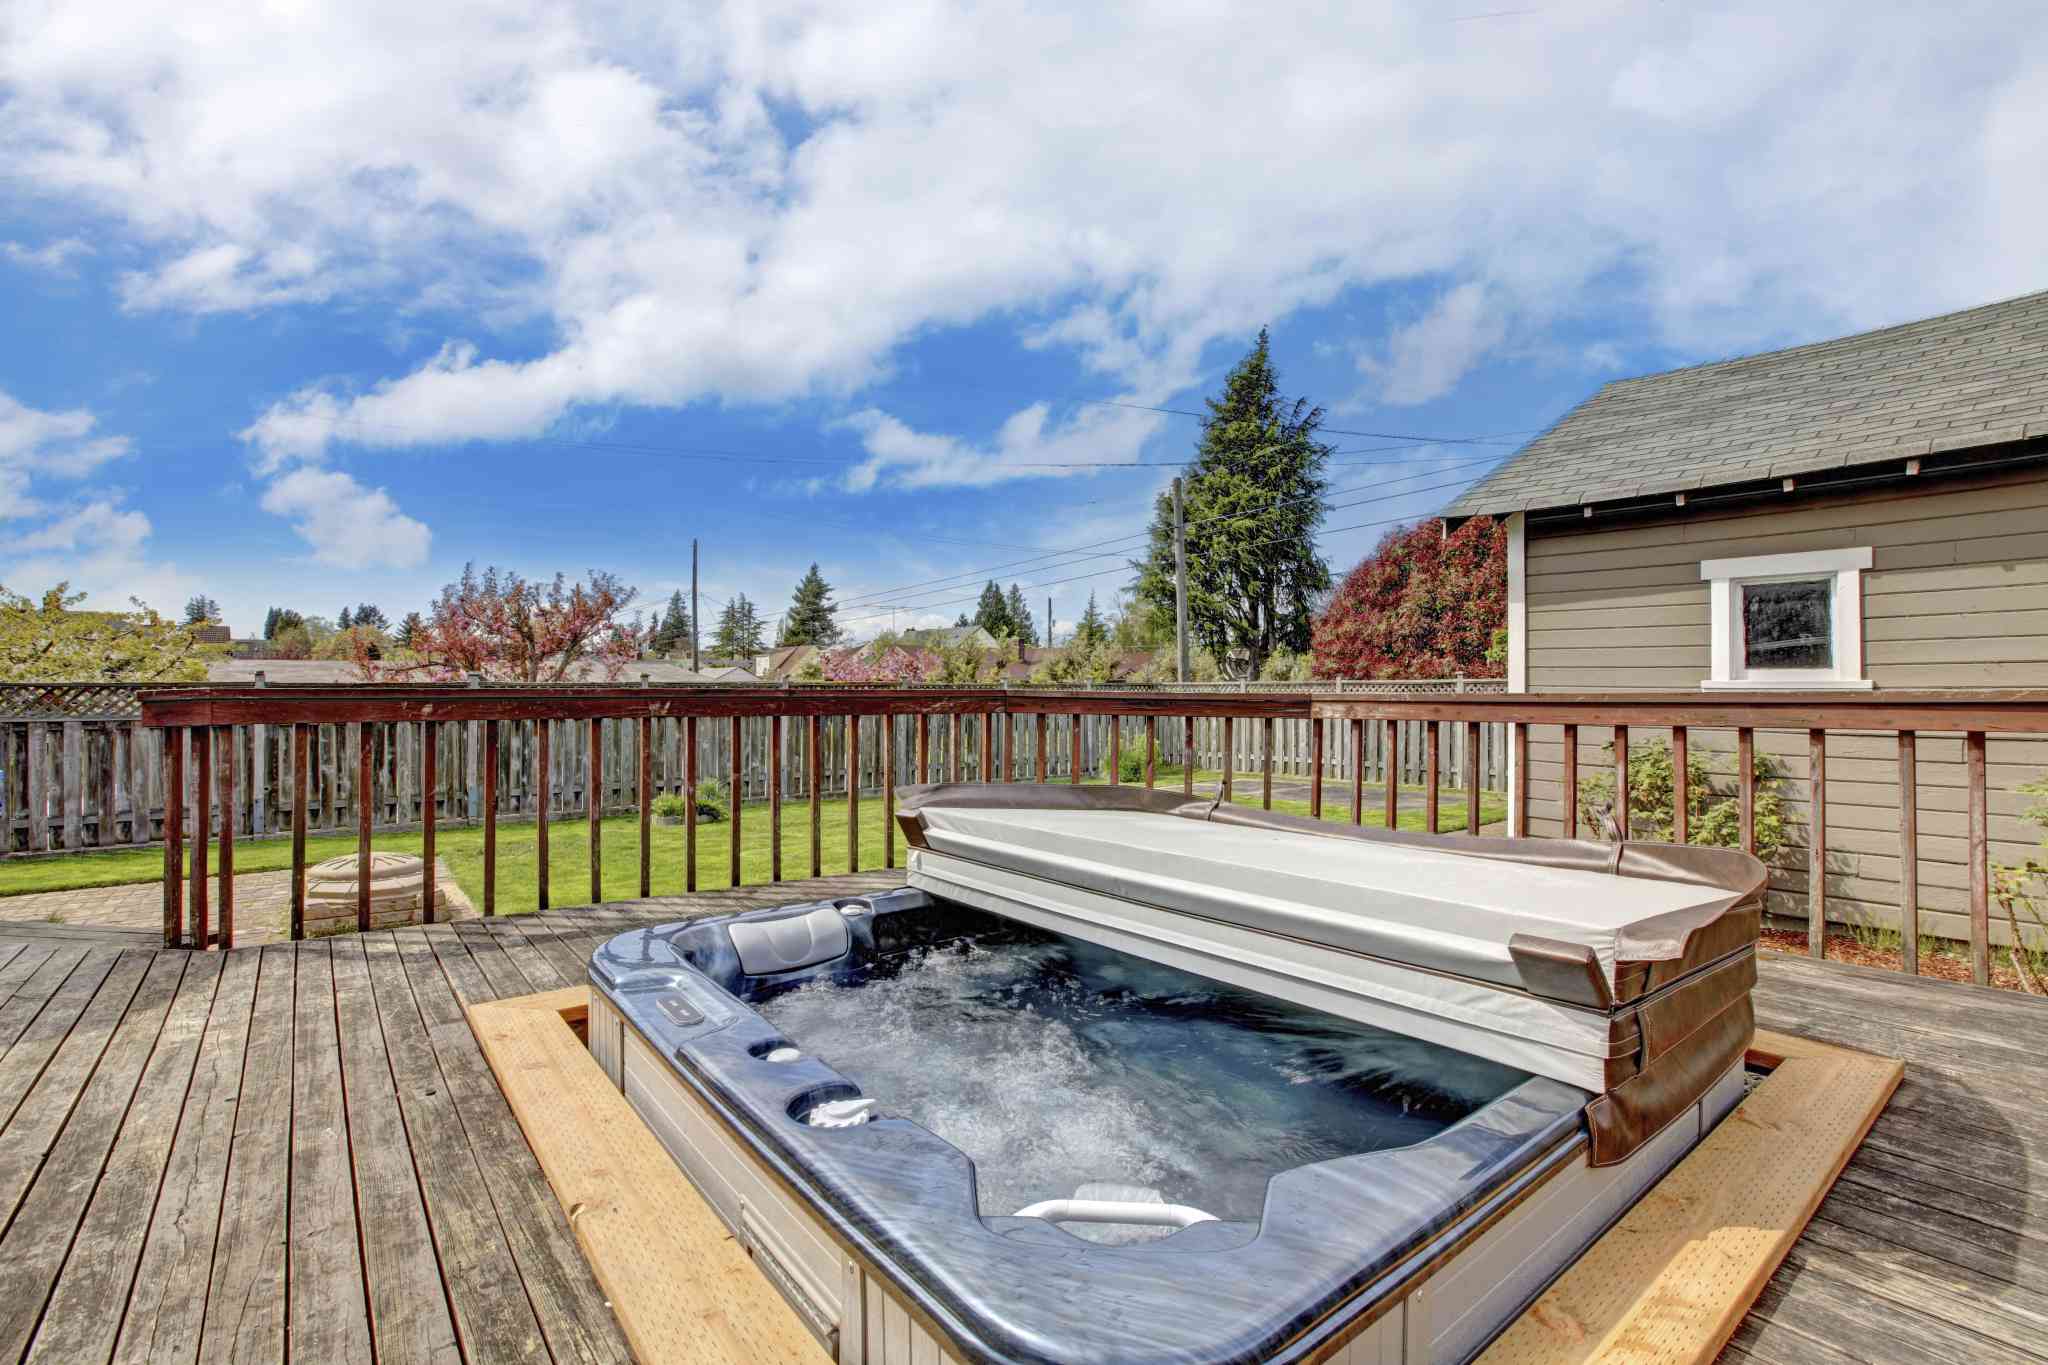 How To Keep Children Safe Around Hot Tubs